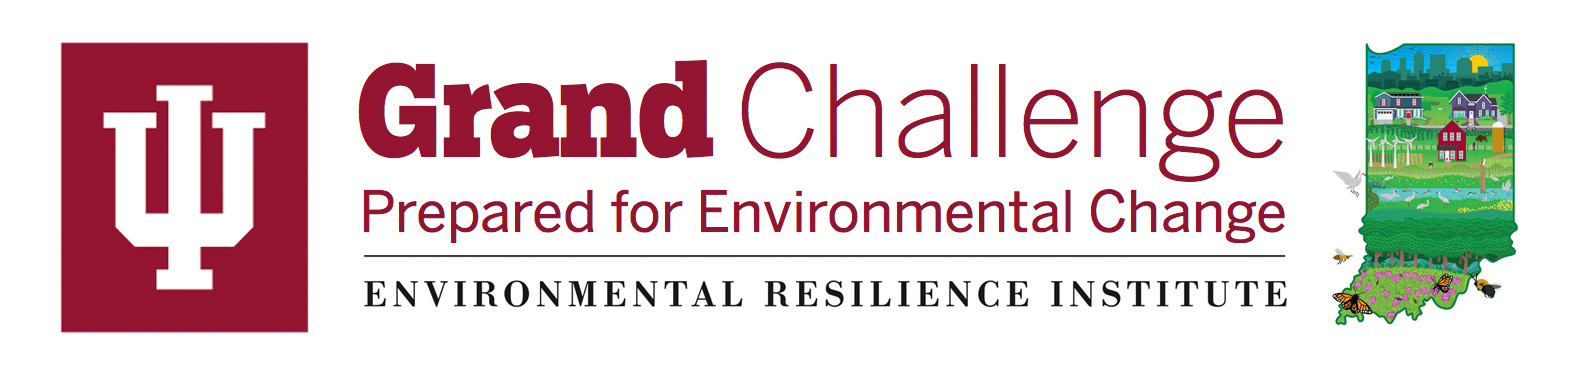 Indiana University Environmental Resilience Institute